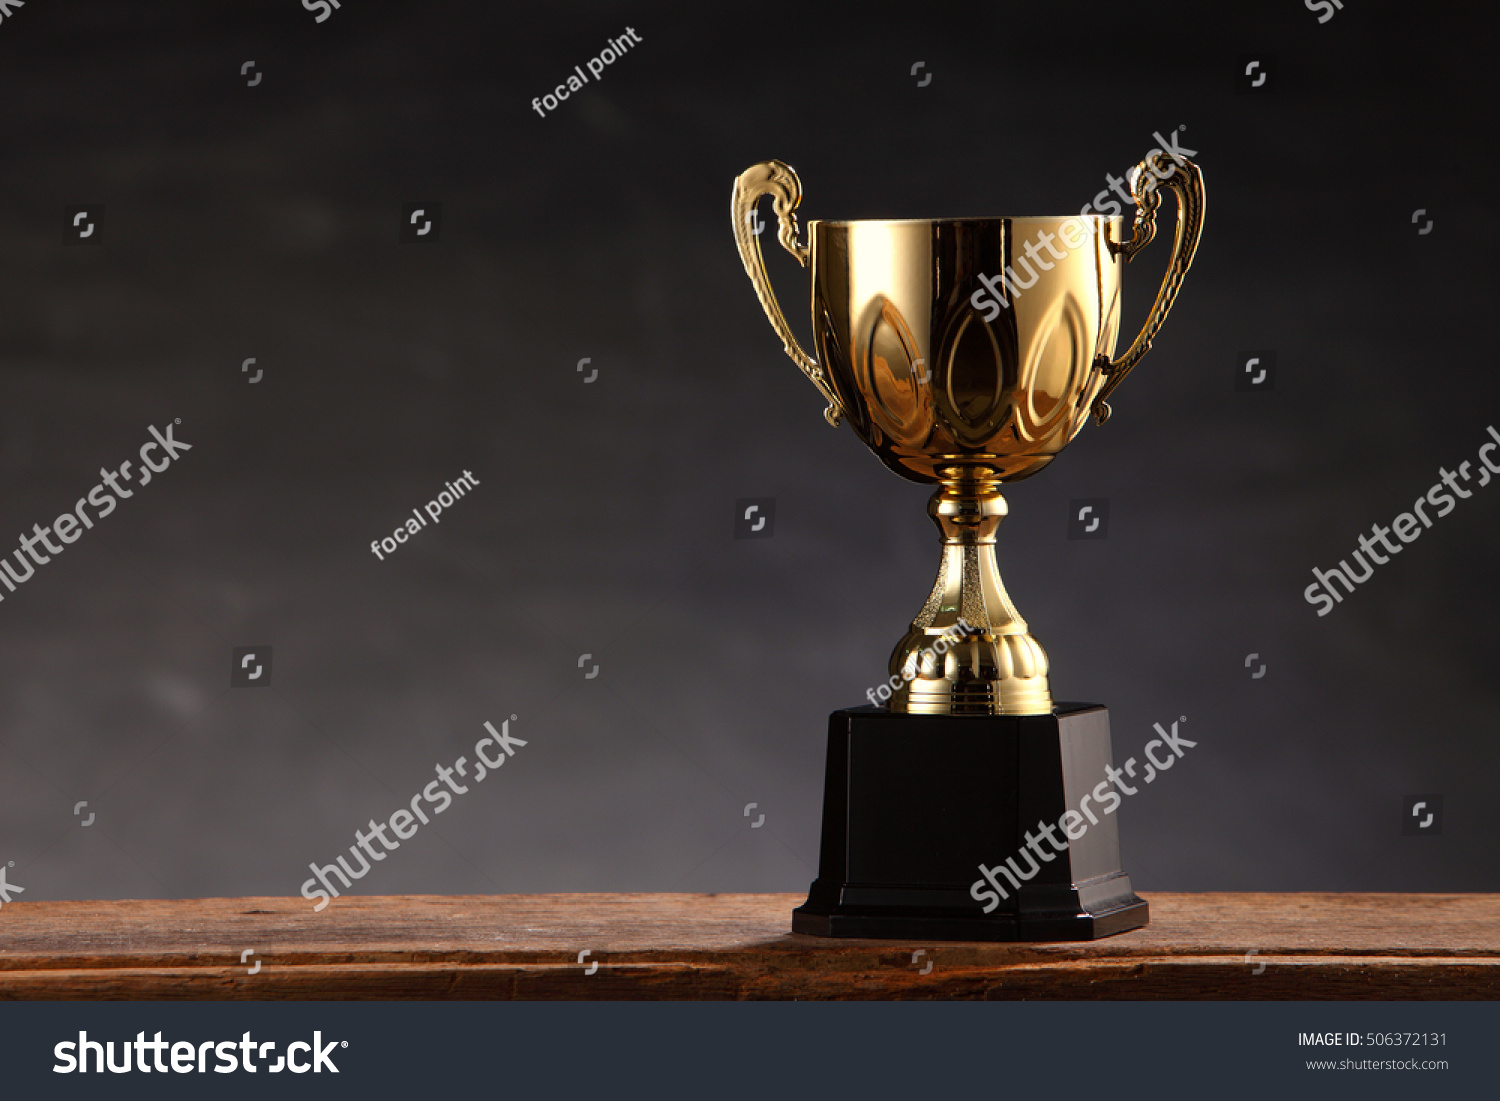 trophy on top of old wooden table in front of blackboard #506372131